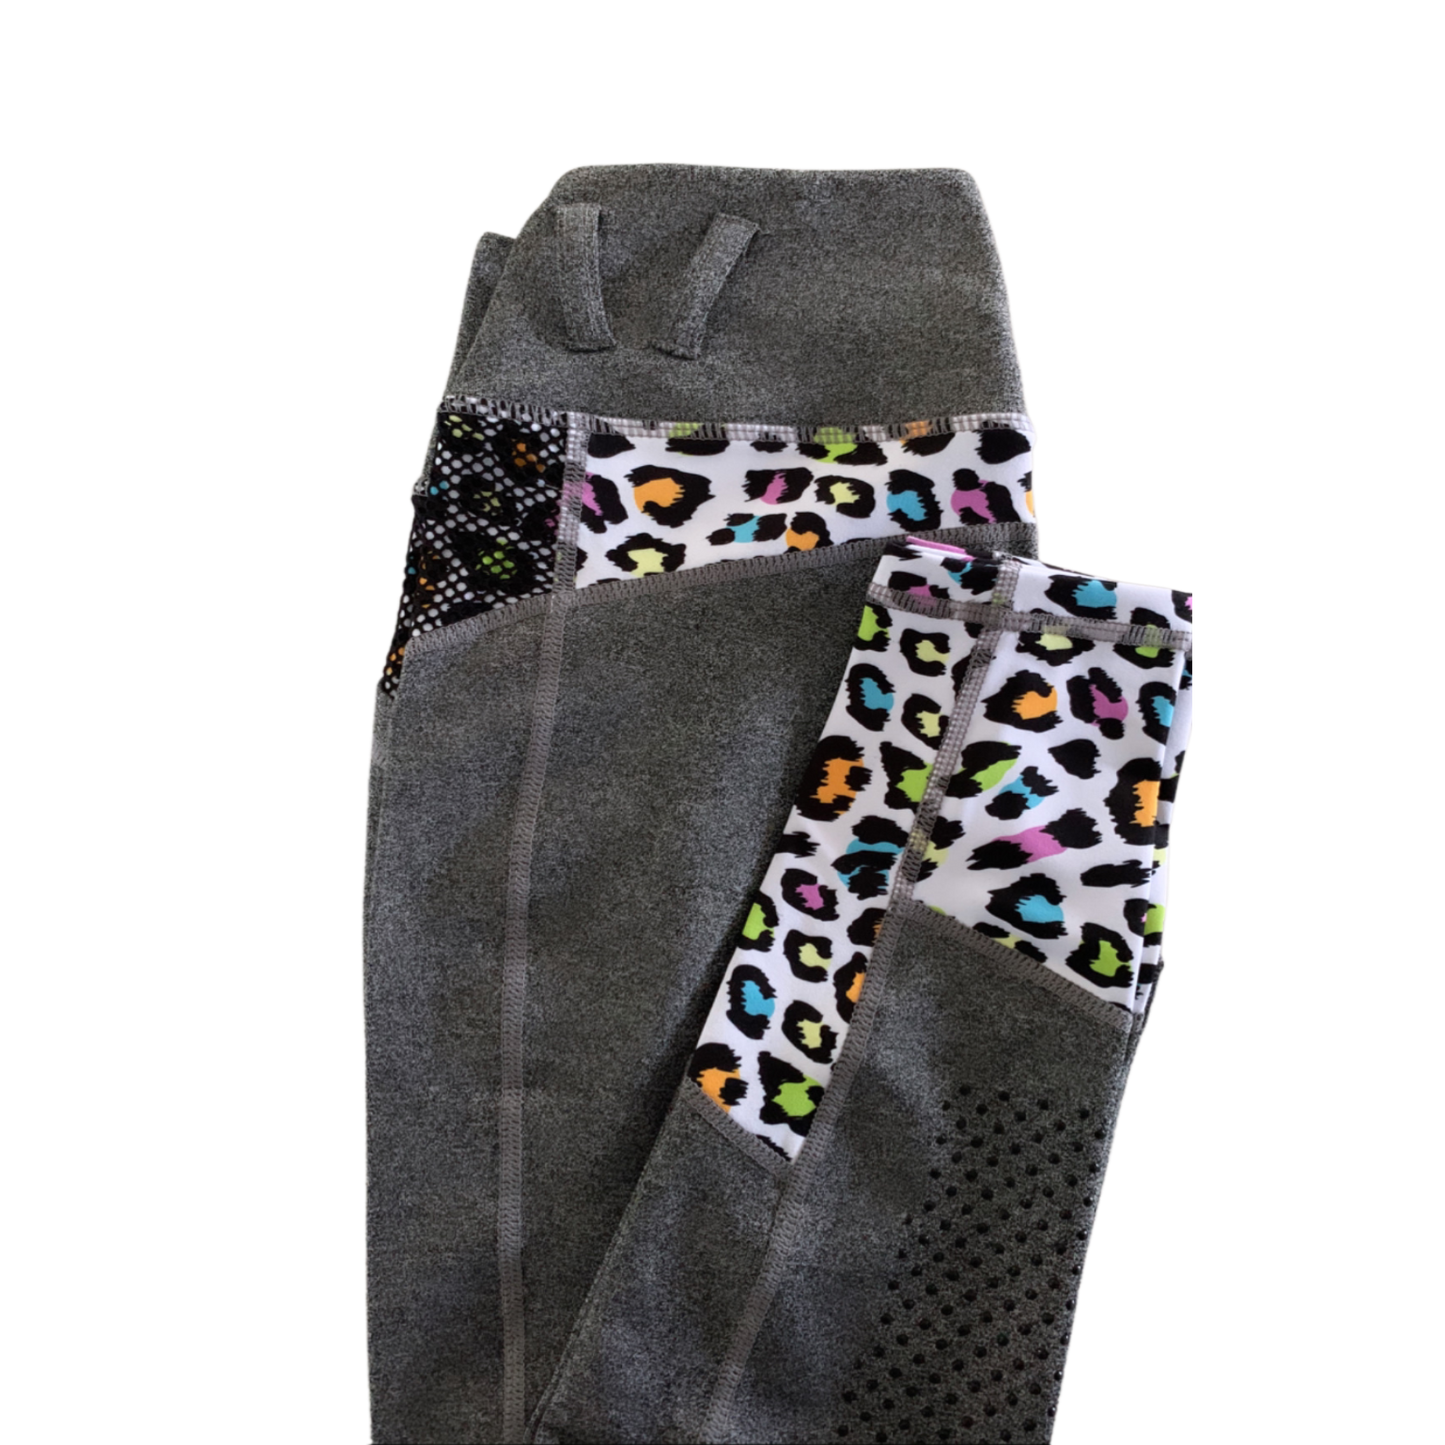 Gray horse riding tights with colorful leopard print waistband.